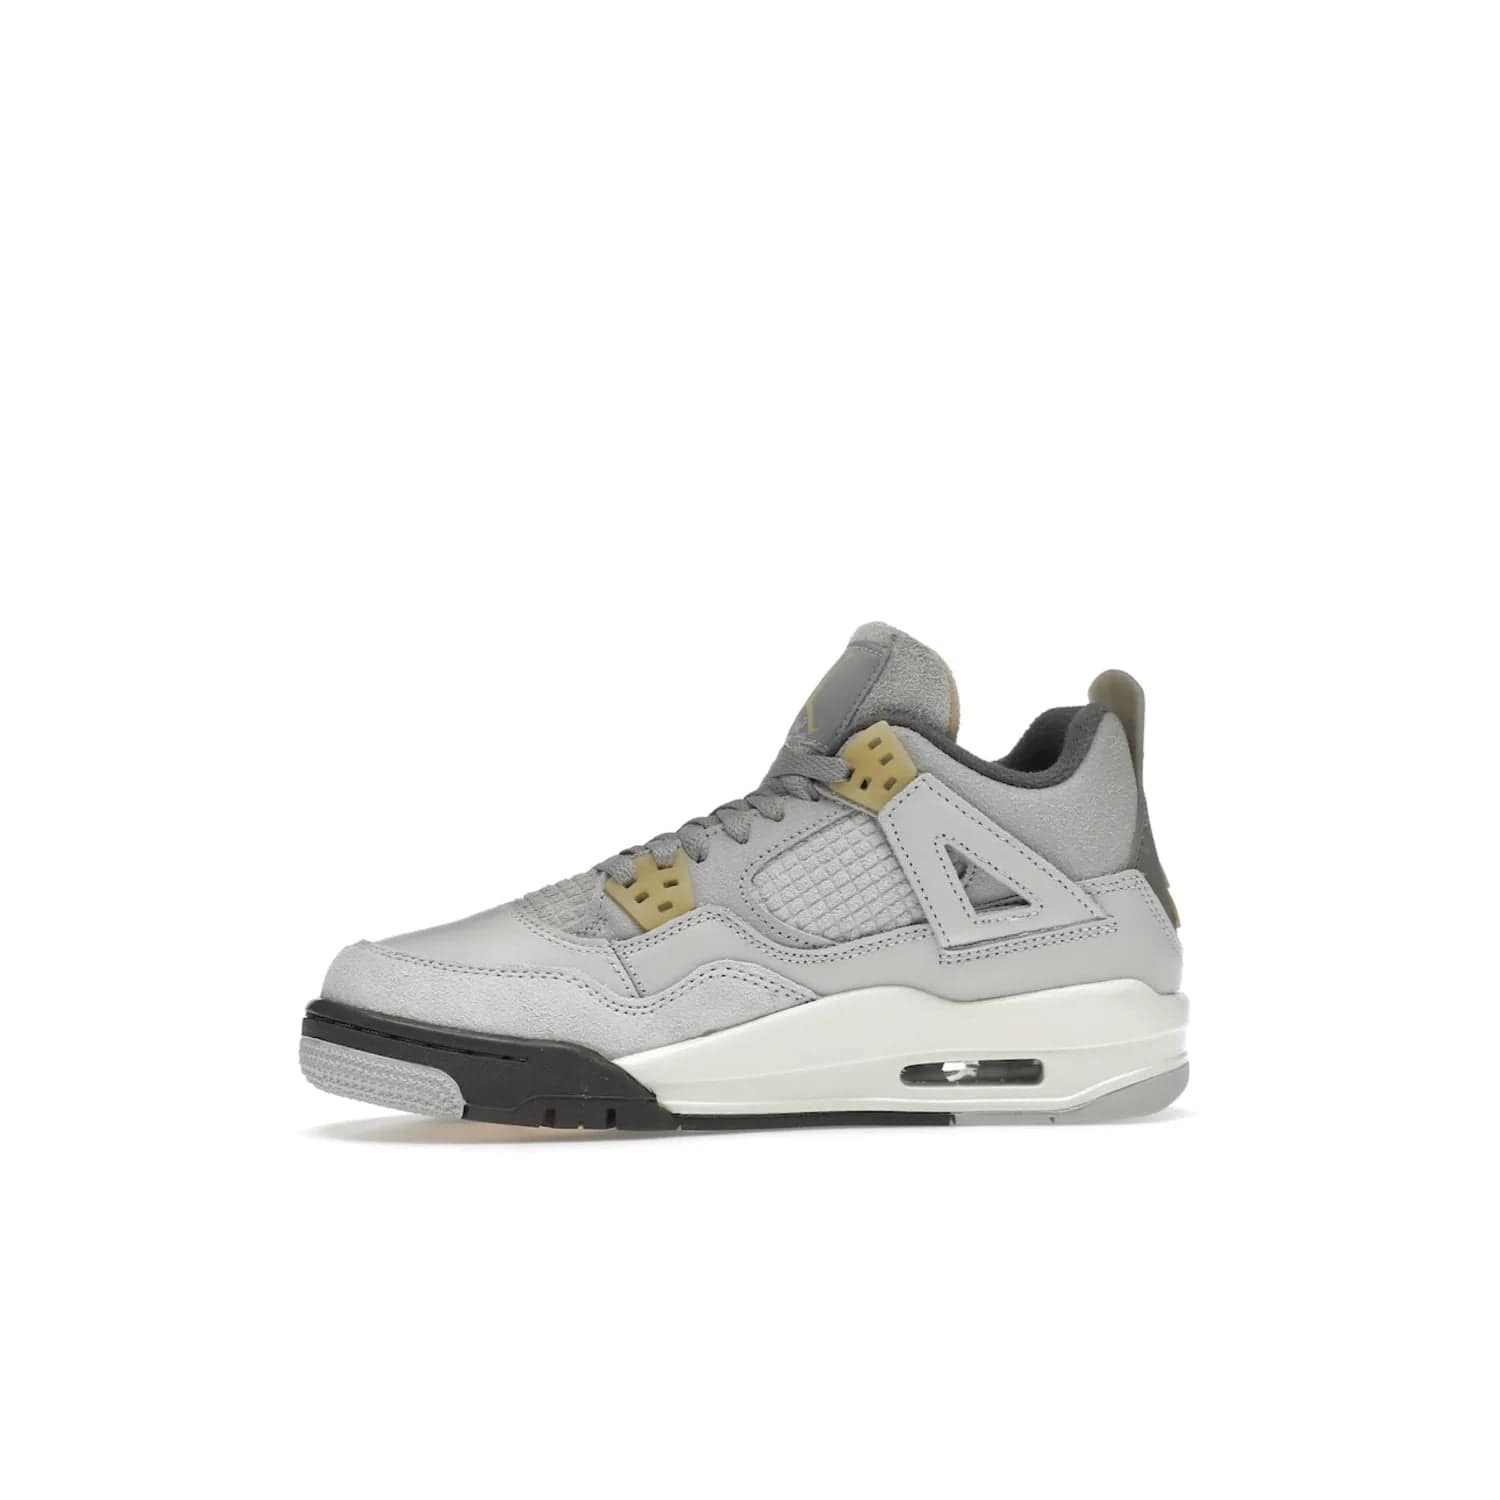 Jordan 4 Retro SE Craft Photon Dust (GS) - Image 18 - Only at www.BallersClubKickz.com - Shop the Jordan 4 Retro SE Craft Photon Dust (GS), the ultimate mix of style and comfort. With photonic dust, pale vanilla, off-white, grey fog, flat pewter and sail colorway, foam midsole, and rubber outsole, don't miss this special edition Jordan 4 releasing Feb 11, 2023.